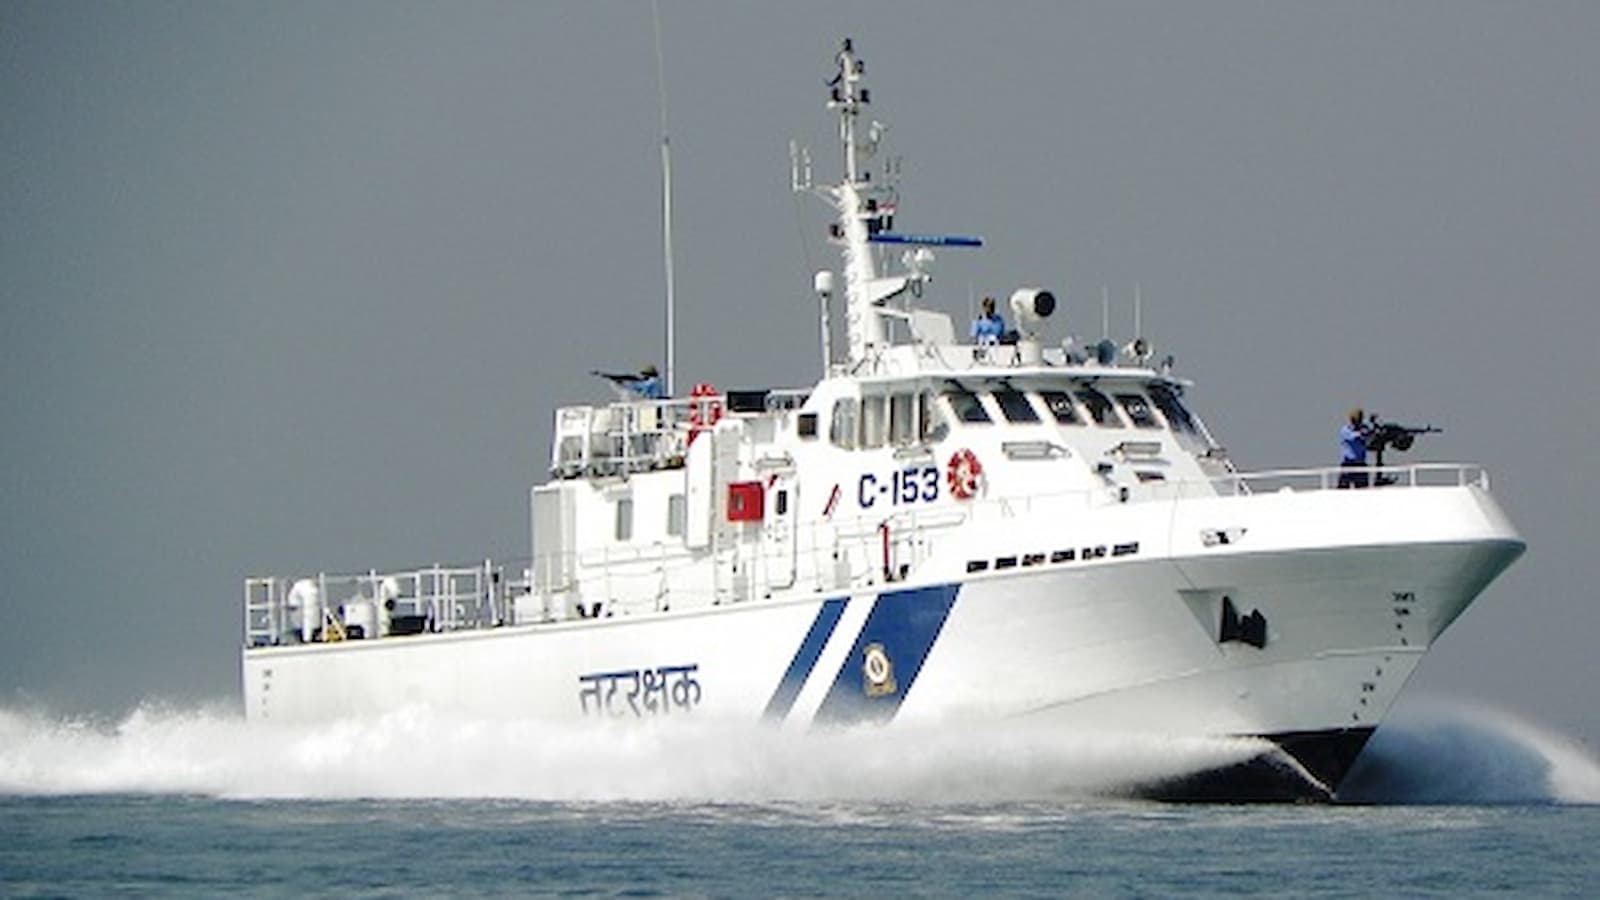 Indian Coast Guard and Jindal Steel & Power, Indian Coast Guard and Jindal Steel & Power partnership